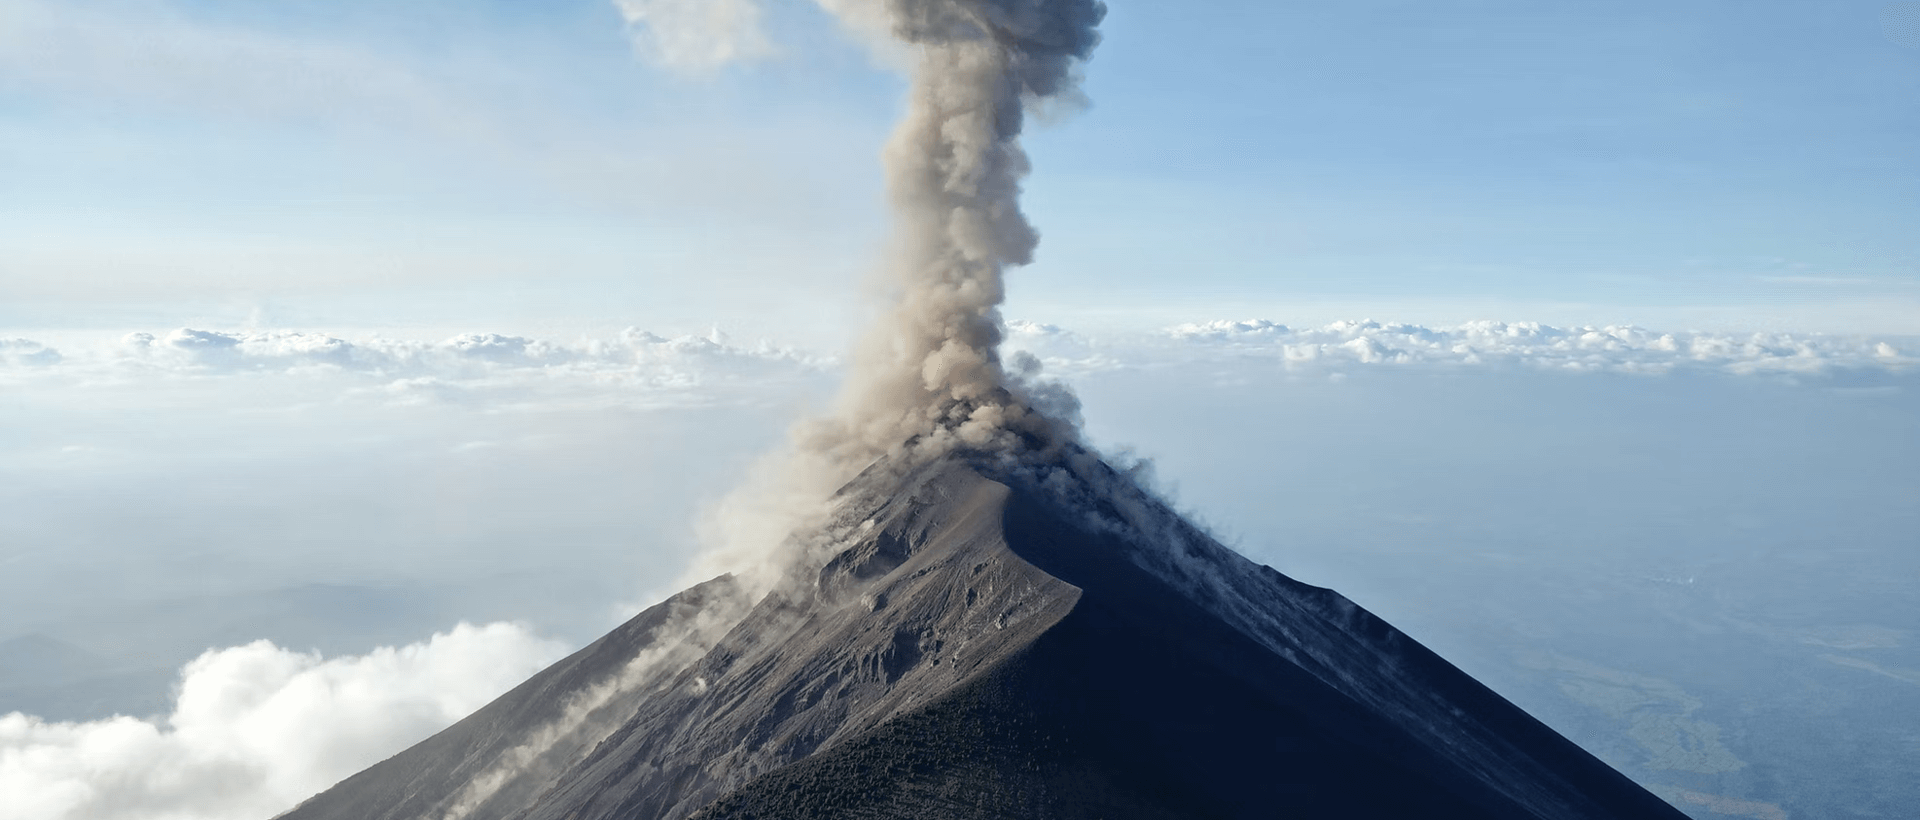 a plume of smoke billows from the top of a mountain.